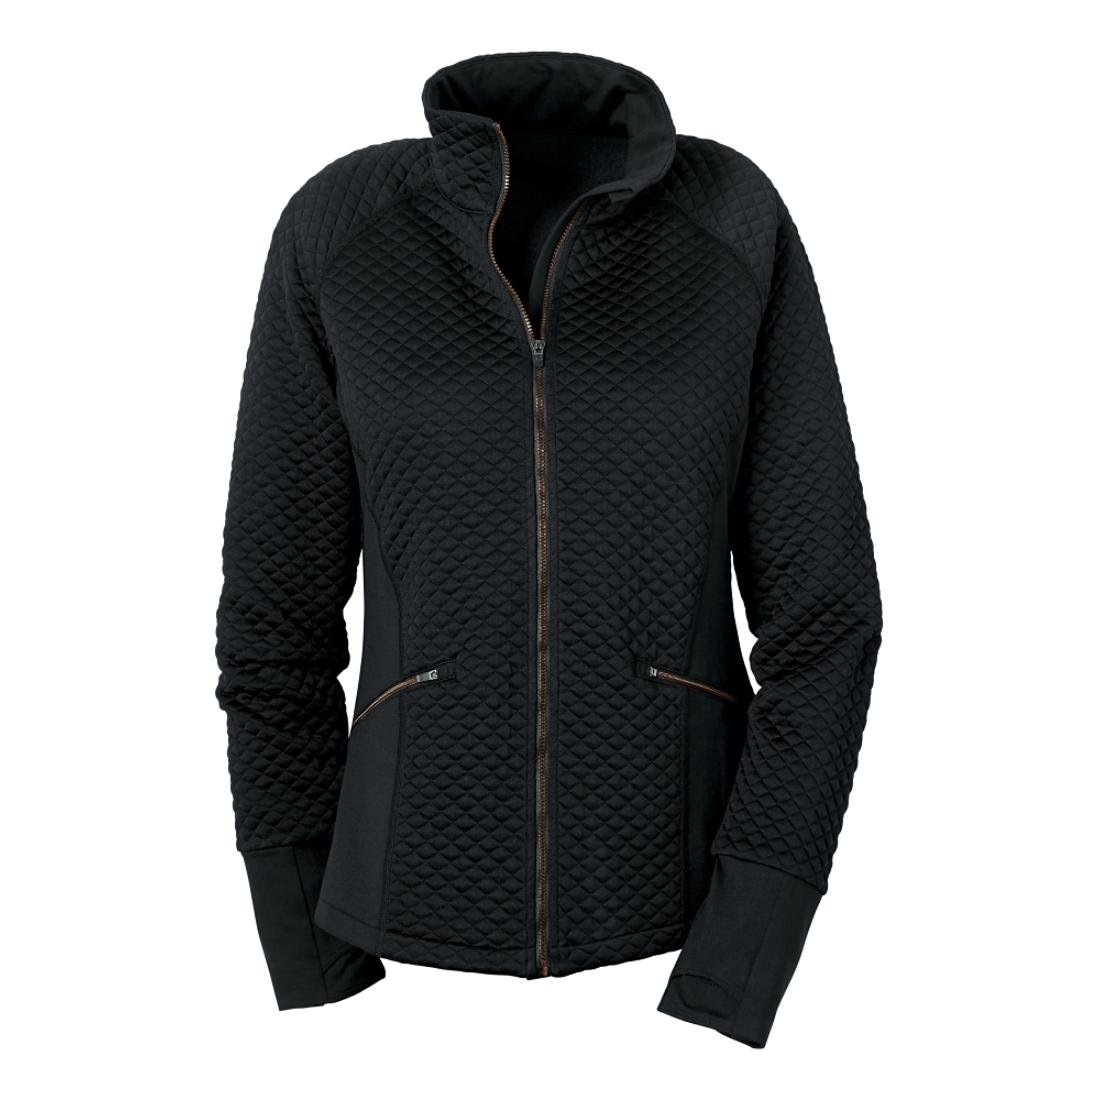 R-Gear Womens Smooth Transition Quilted Jacket BLACK-BLACK-WHITE - 12